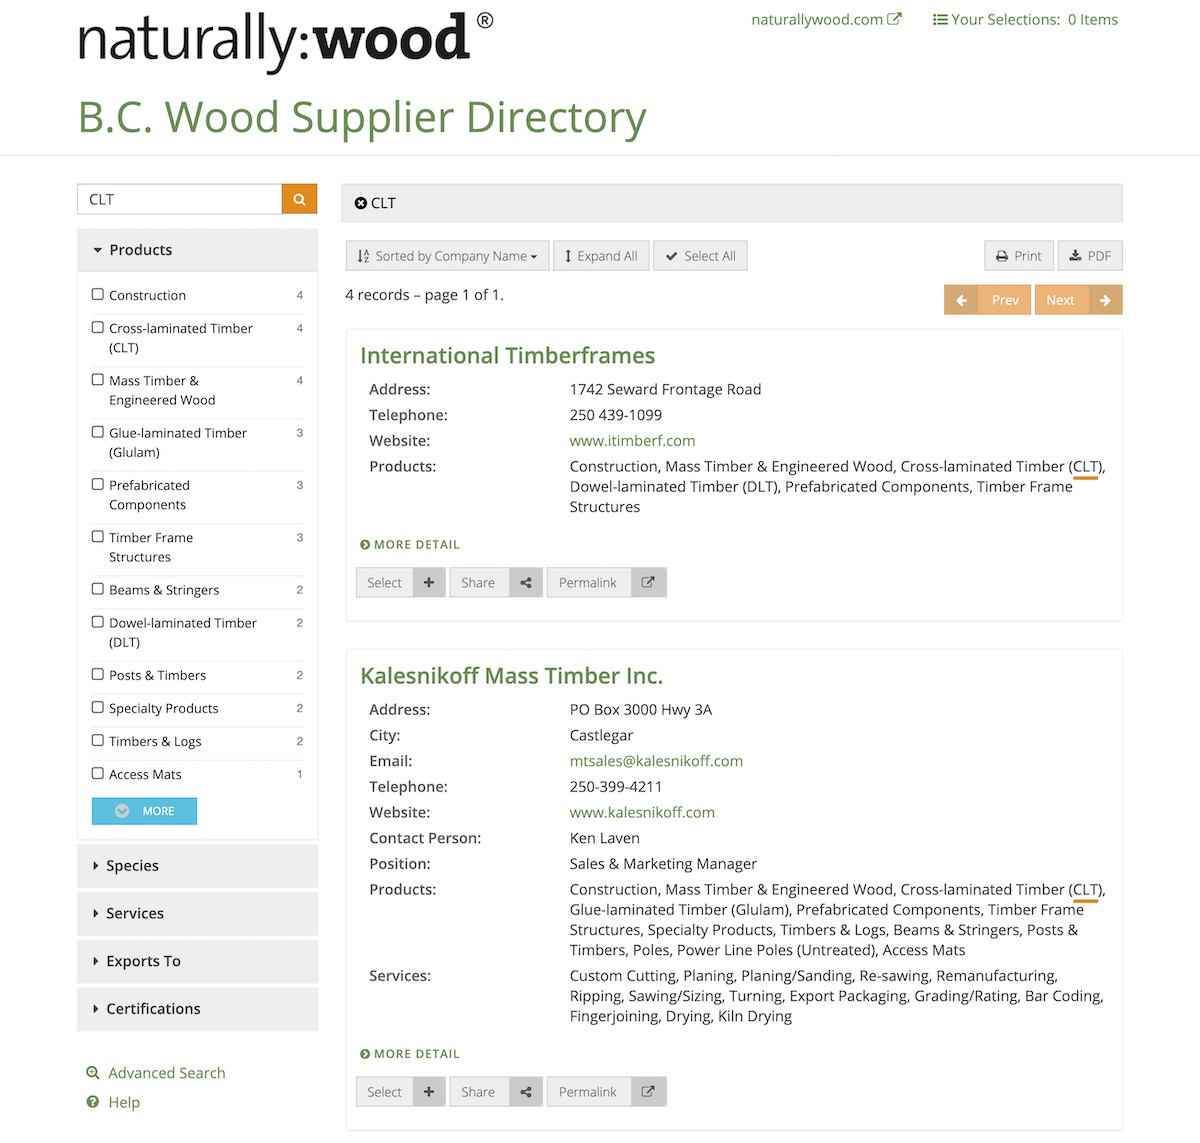 B.C. Wood Supplier Directory Search Results